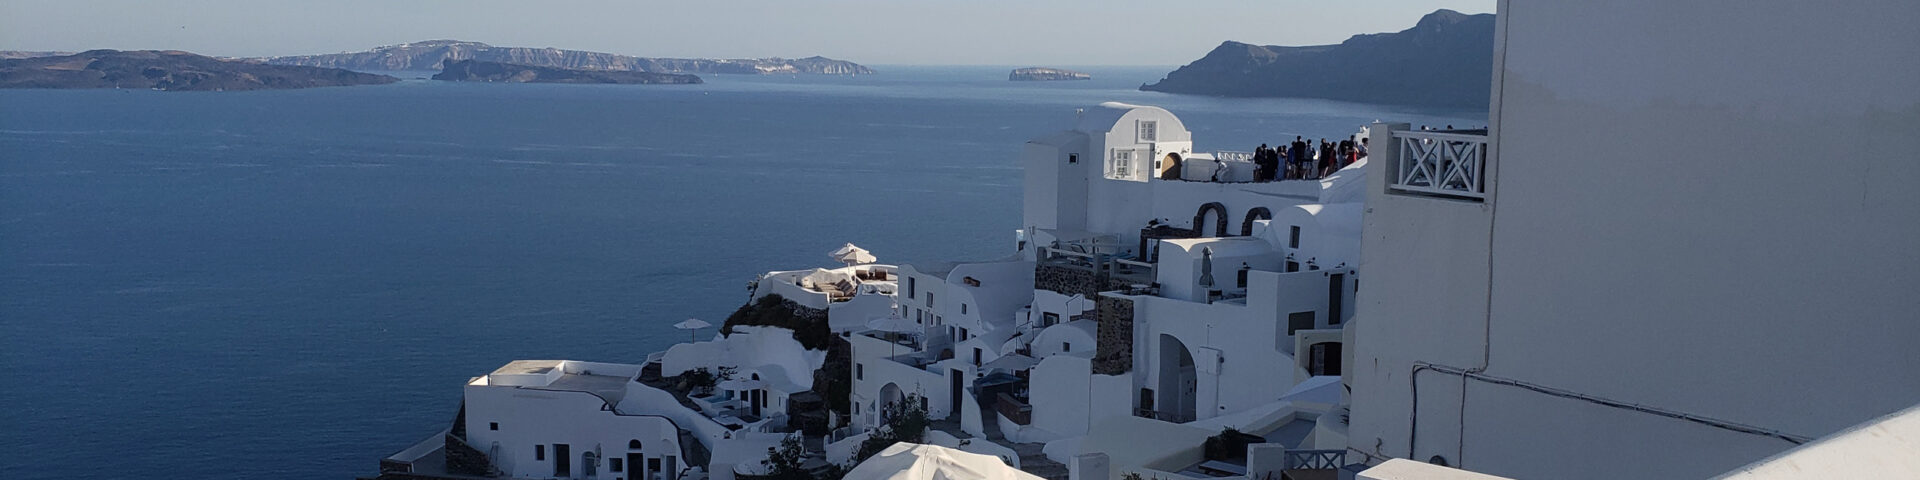 View from Santorini Island in the Southern Aegean sea